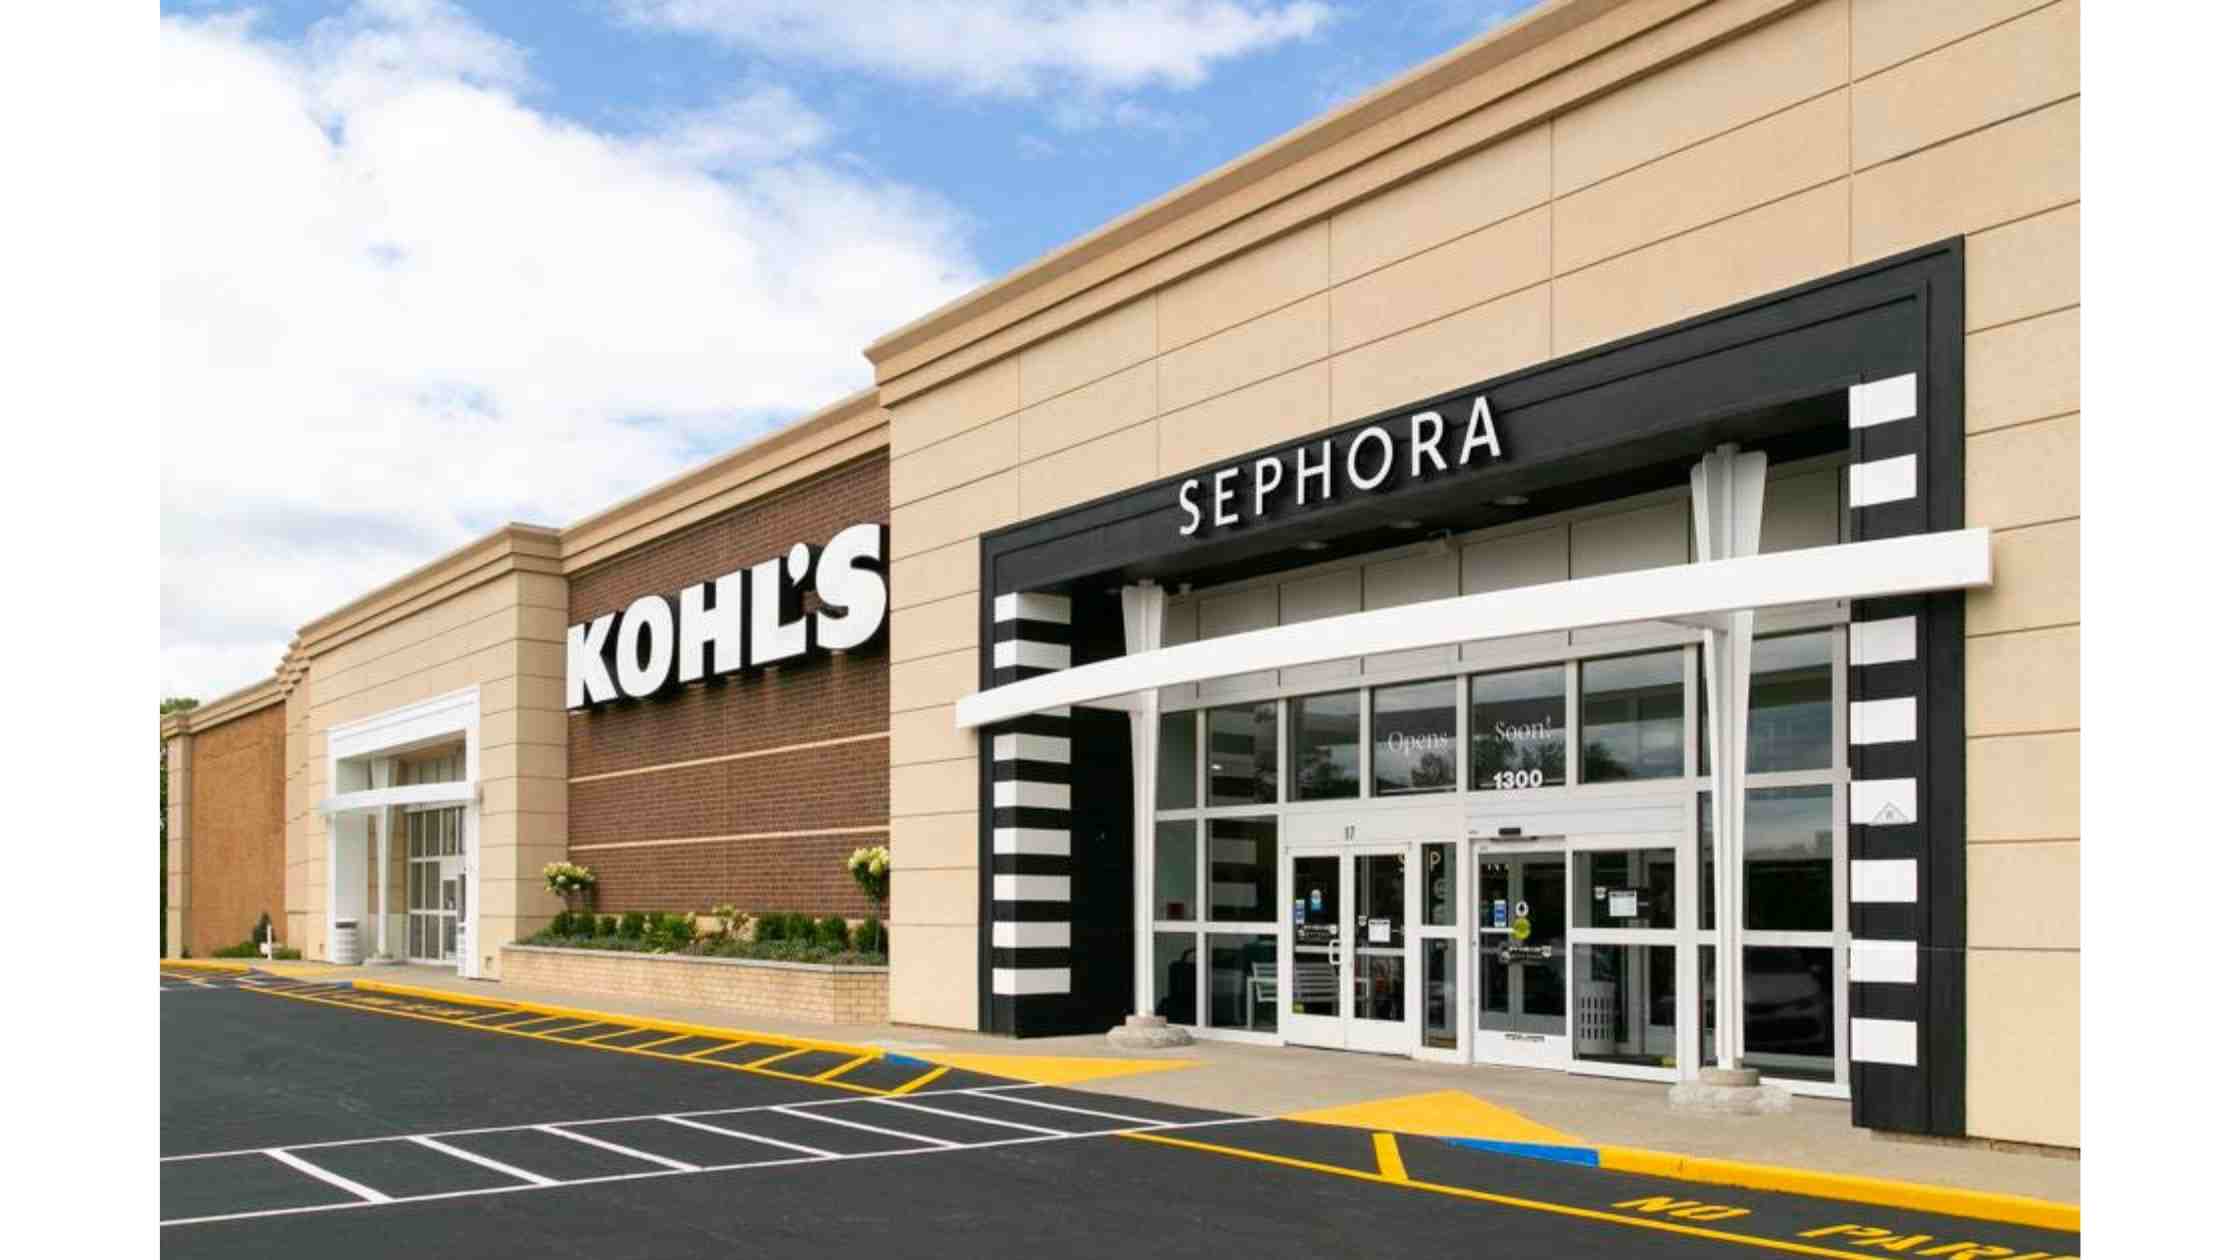 is kohl's going out of business